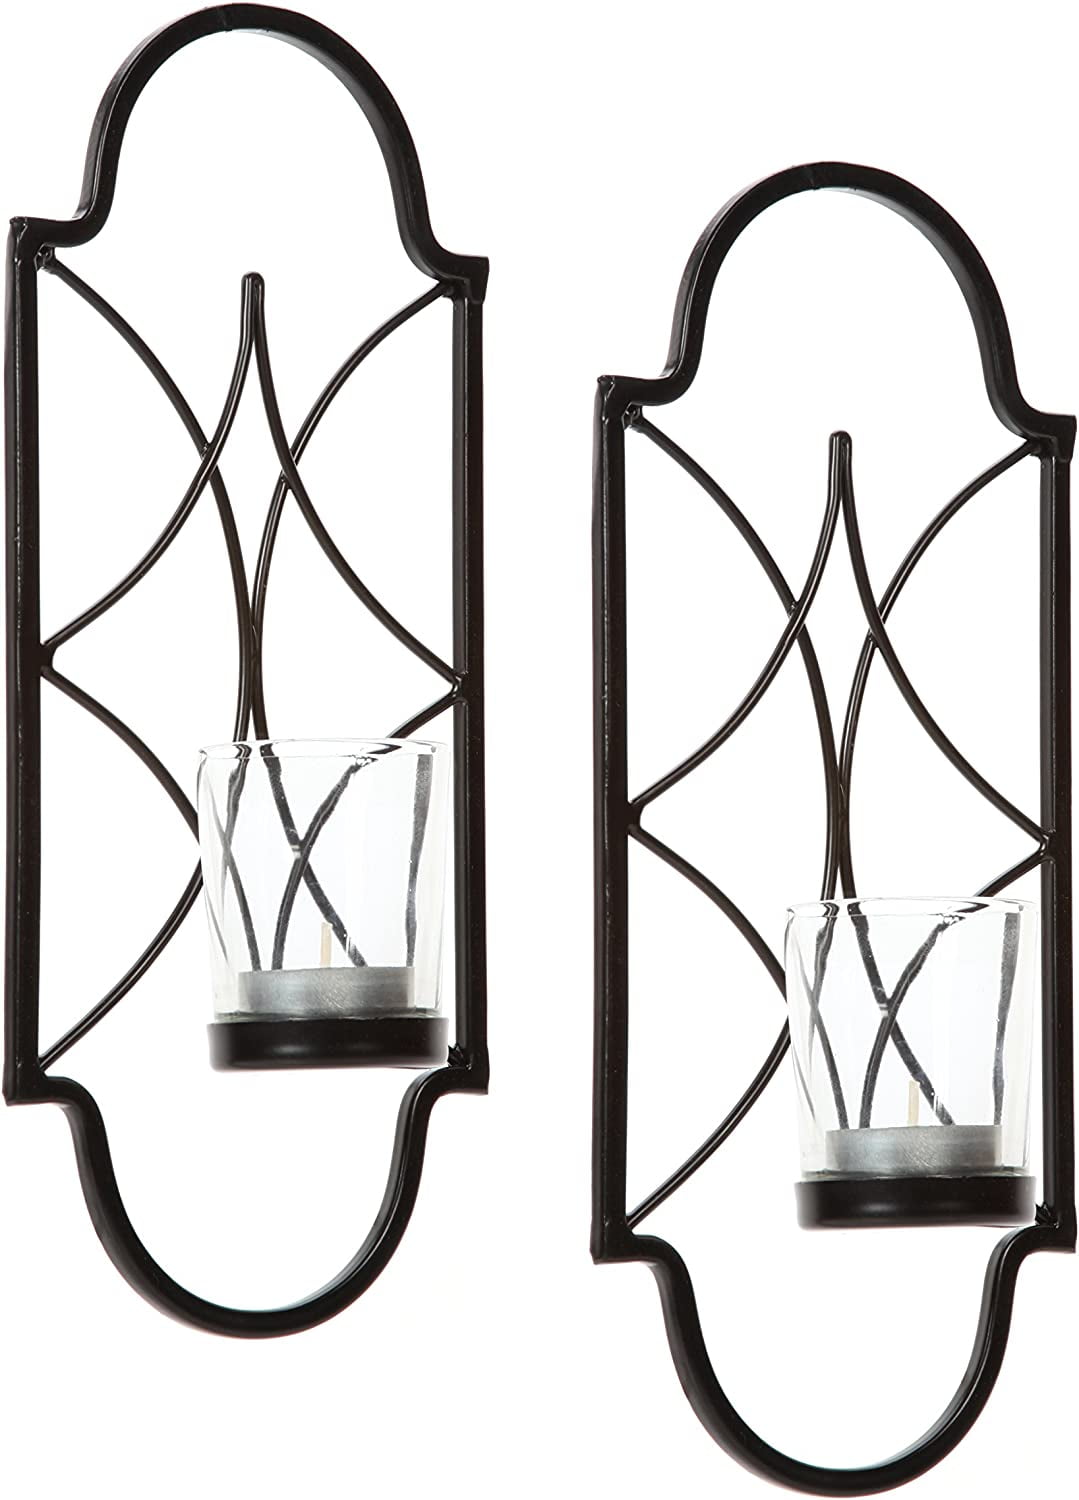 HOSLEY® Iron Wall Pillar Candle Sconce, Silver finish, Set of 2